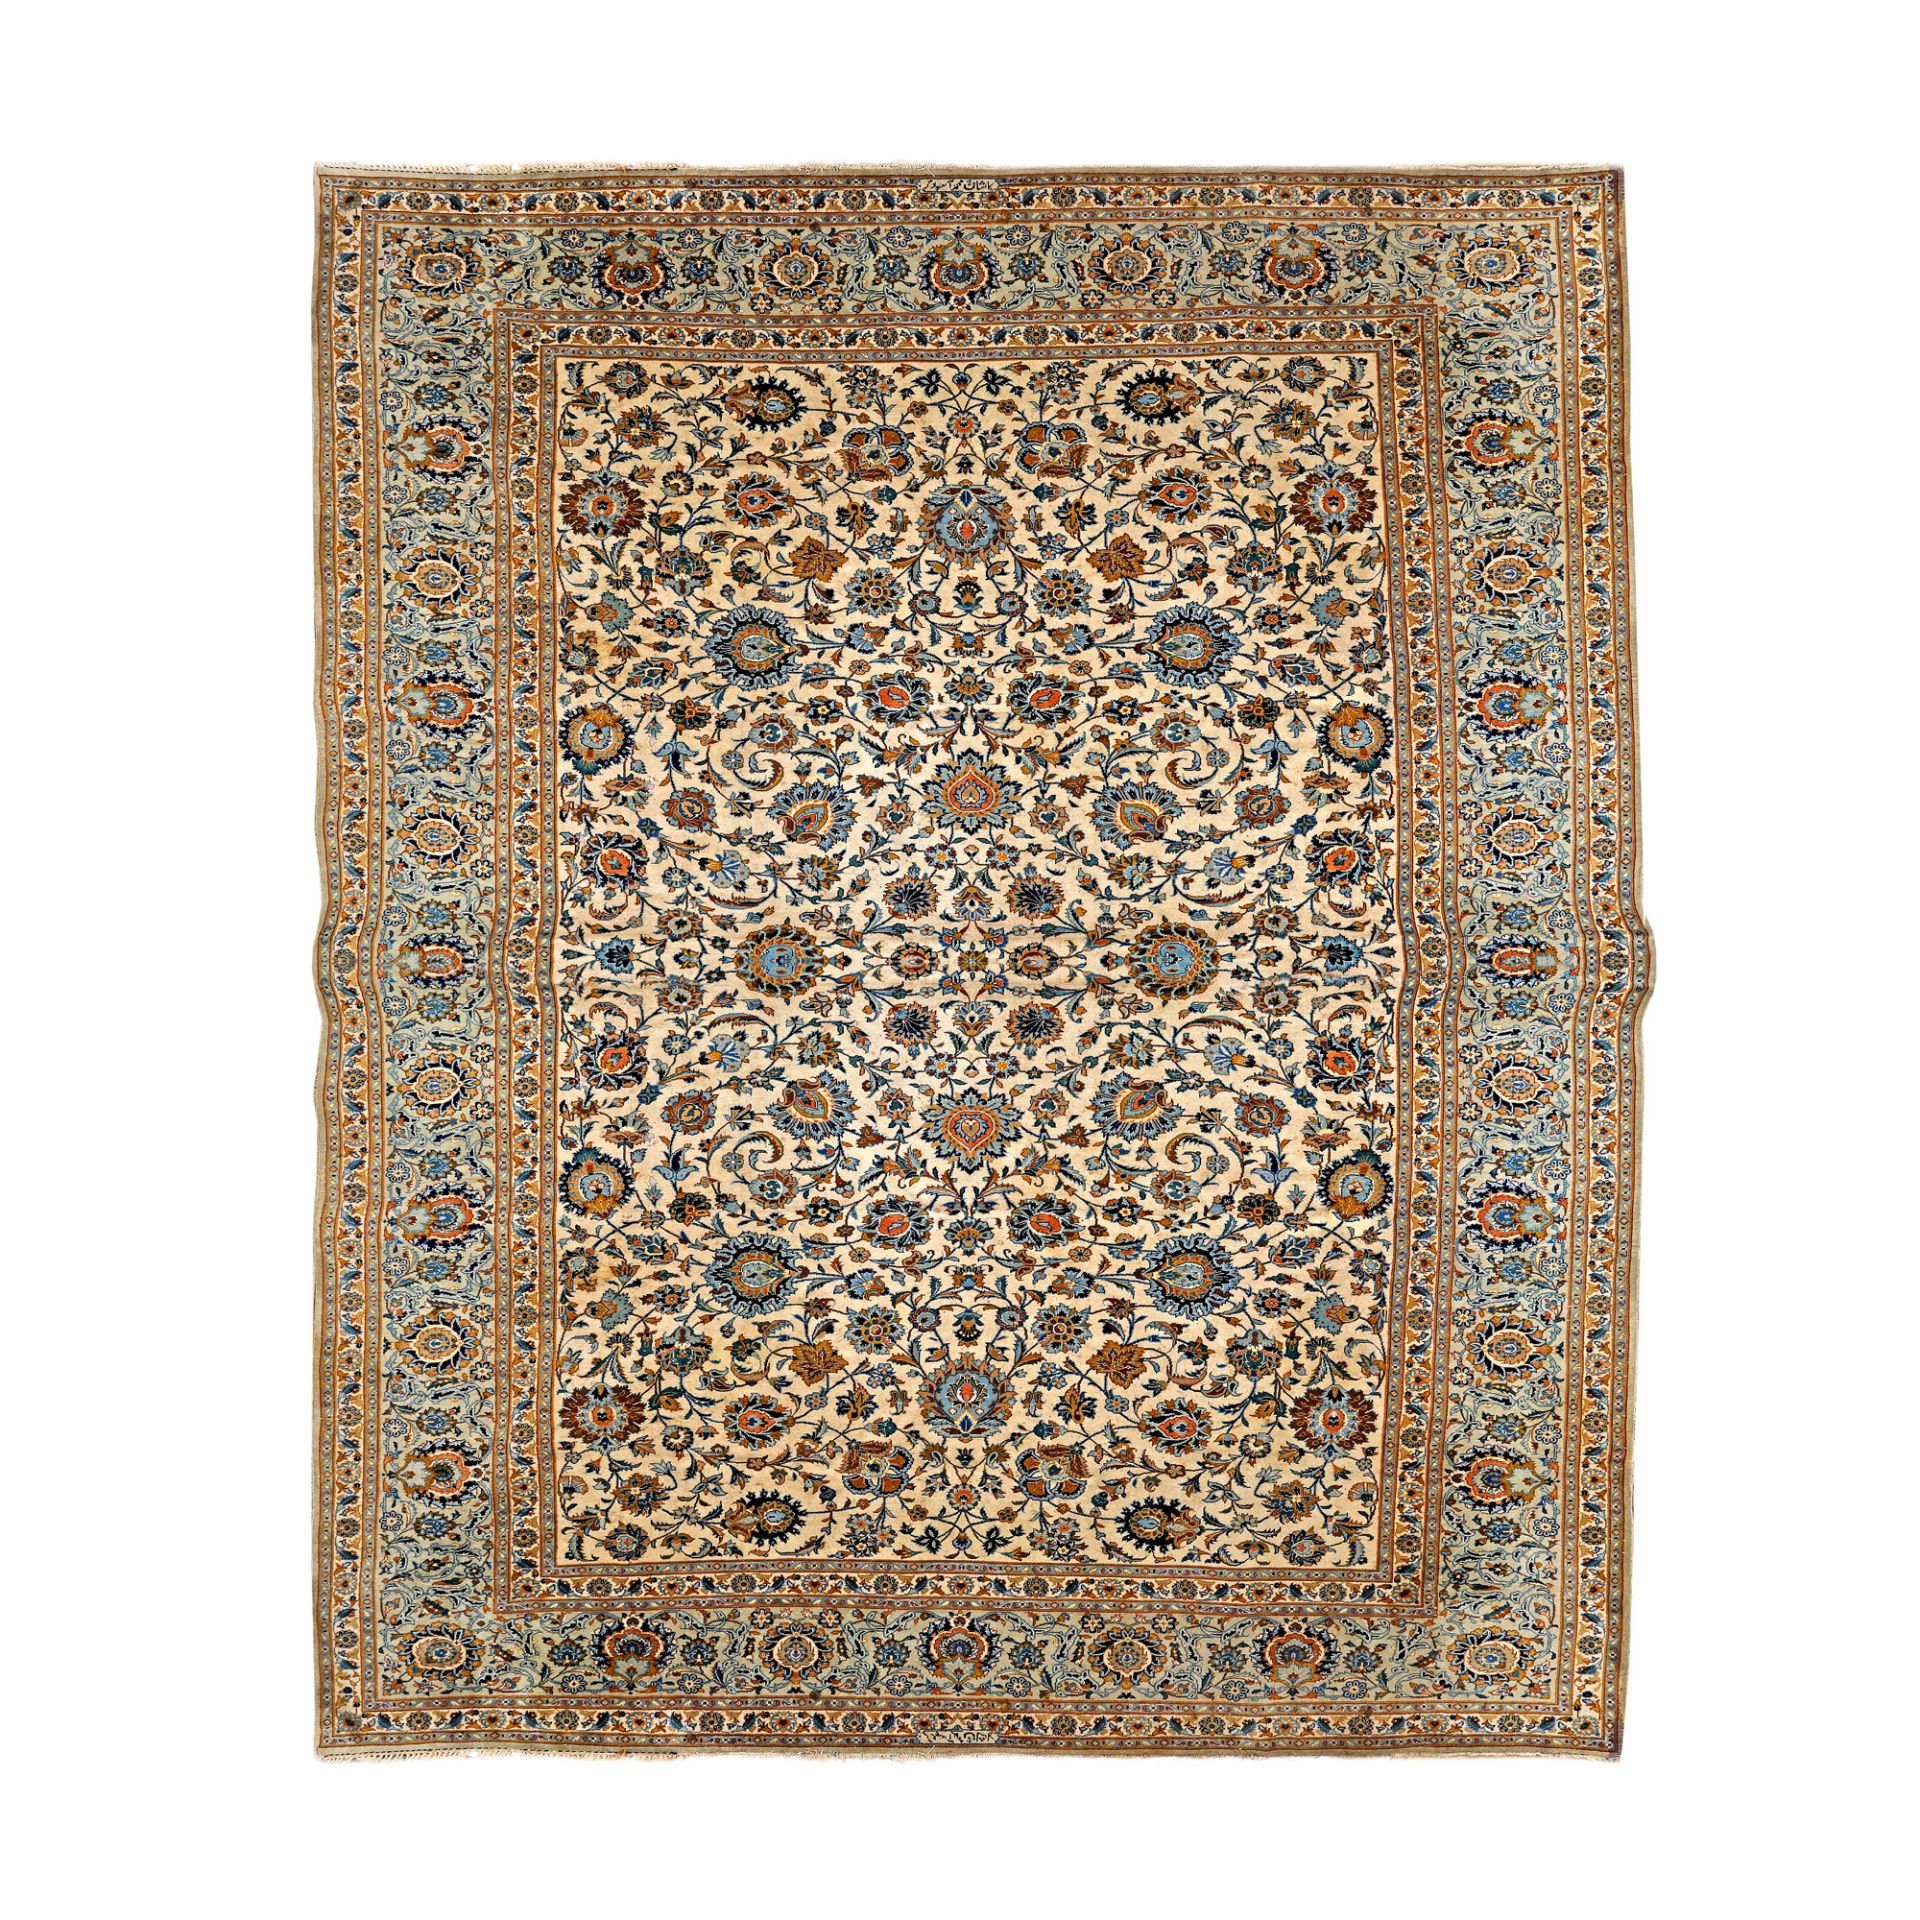 Kashan wool rug, decorated with rosette and floral motifs, Iran